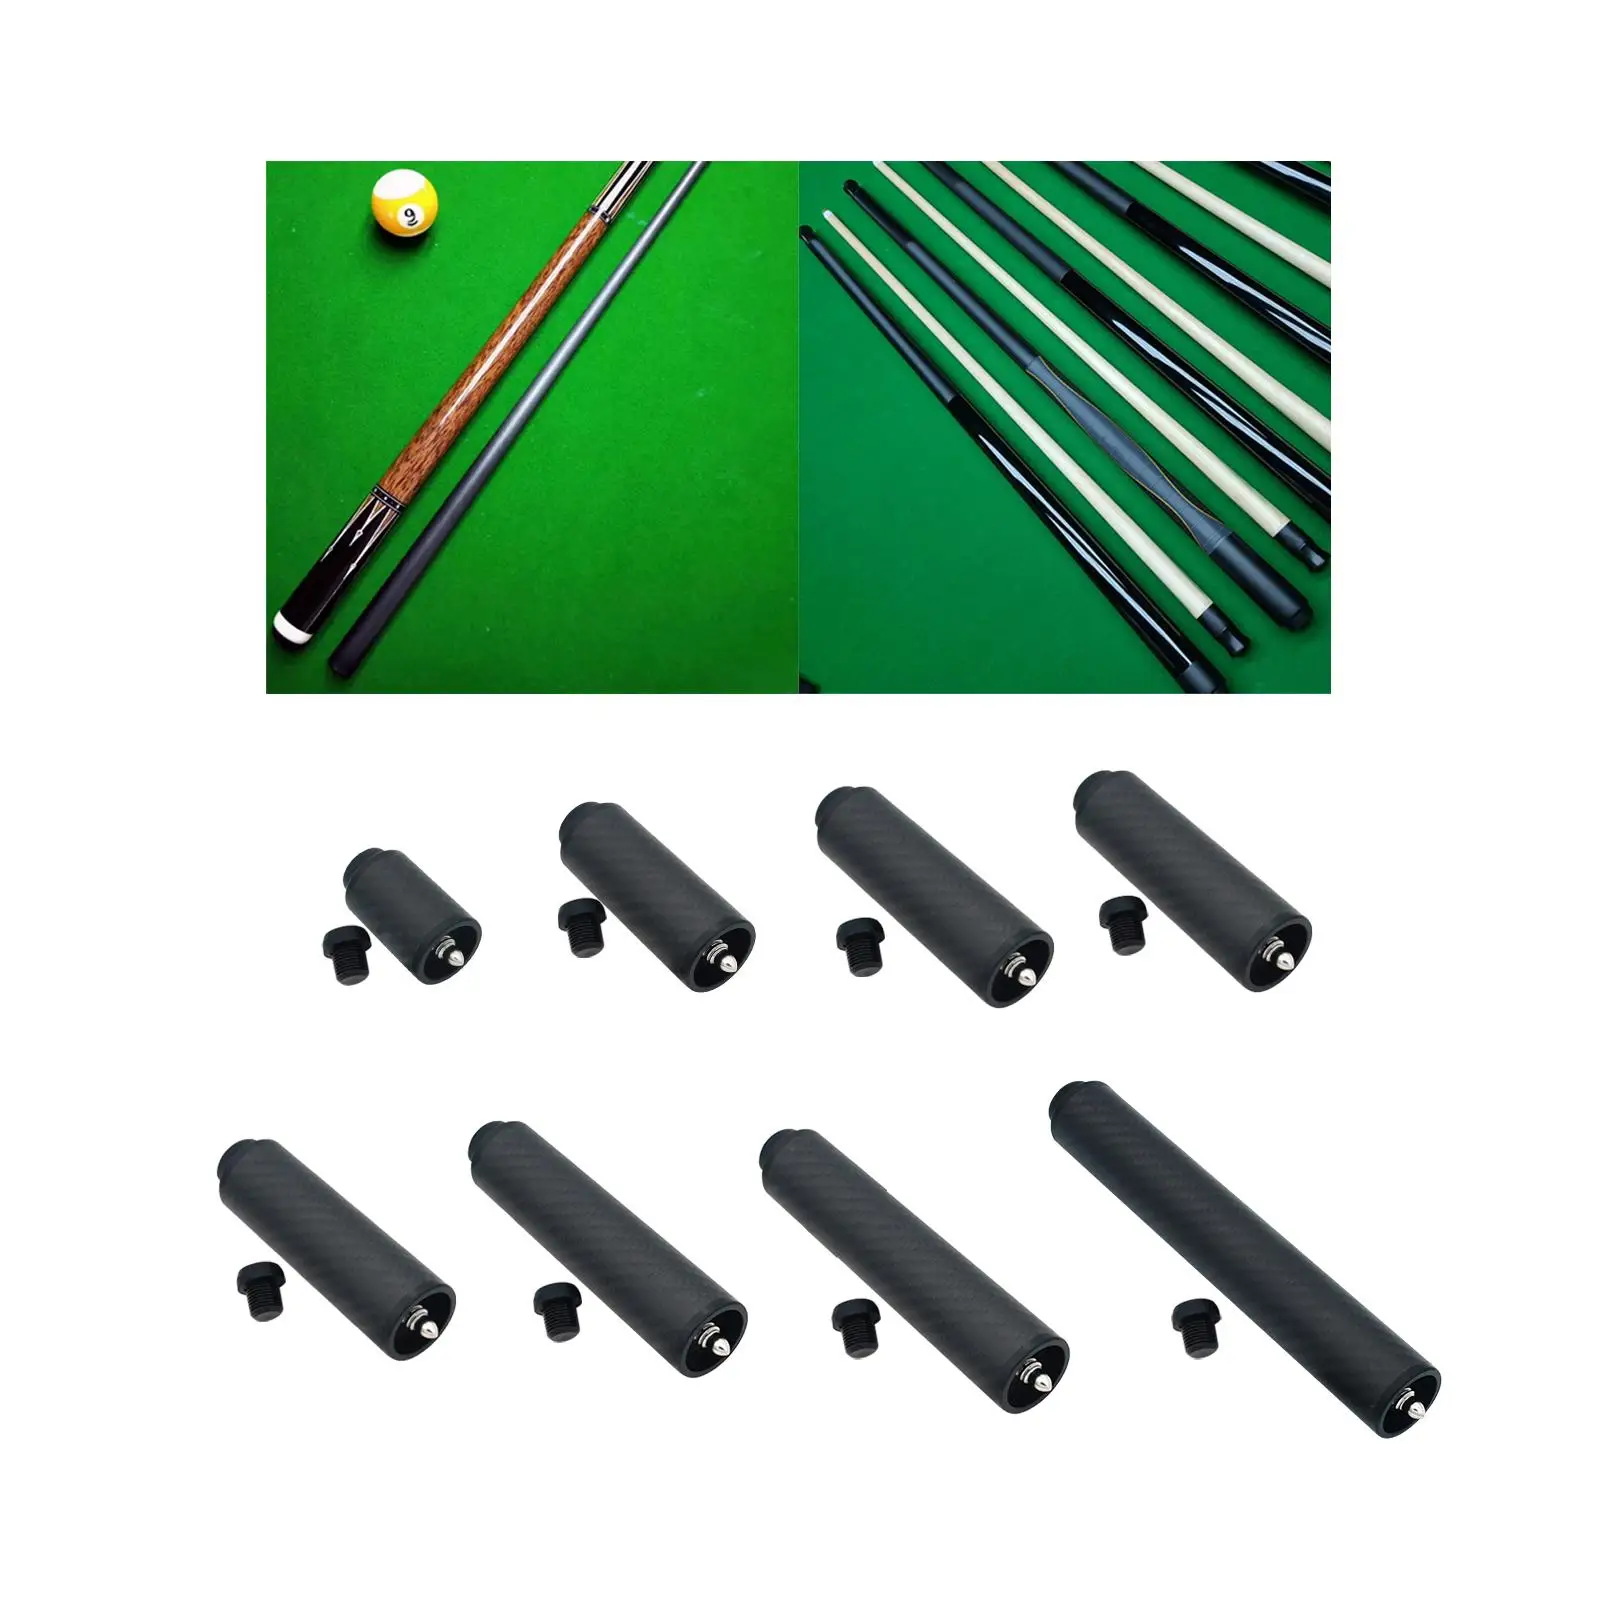 Billiards Pool Cue Extension Compact Cue End Lengthener Cue Stick Extender